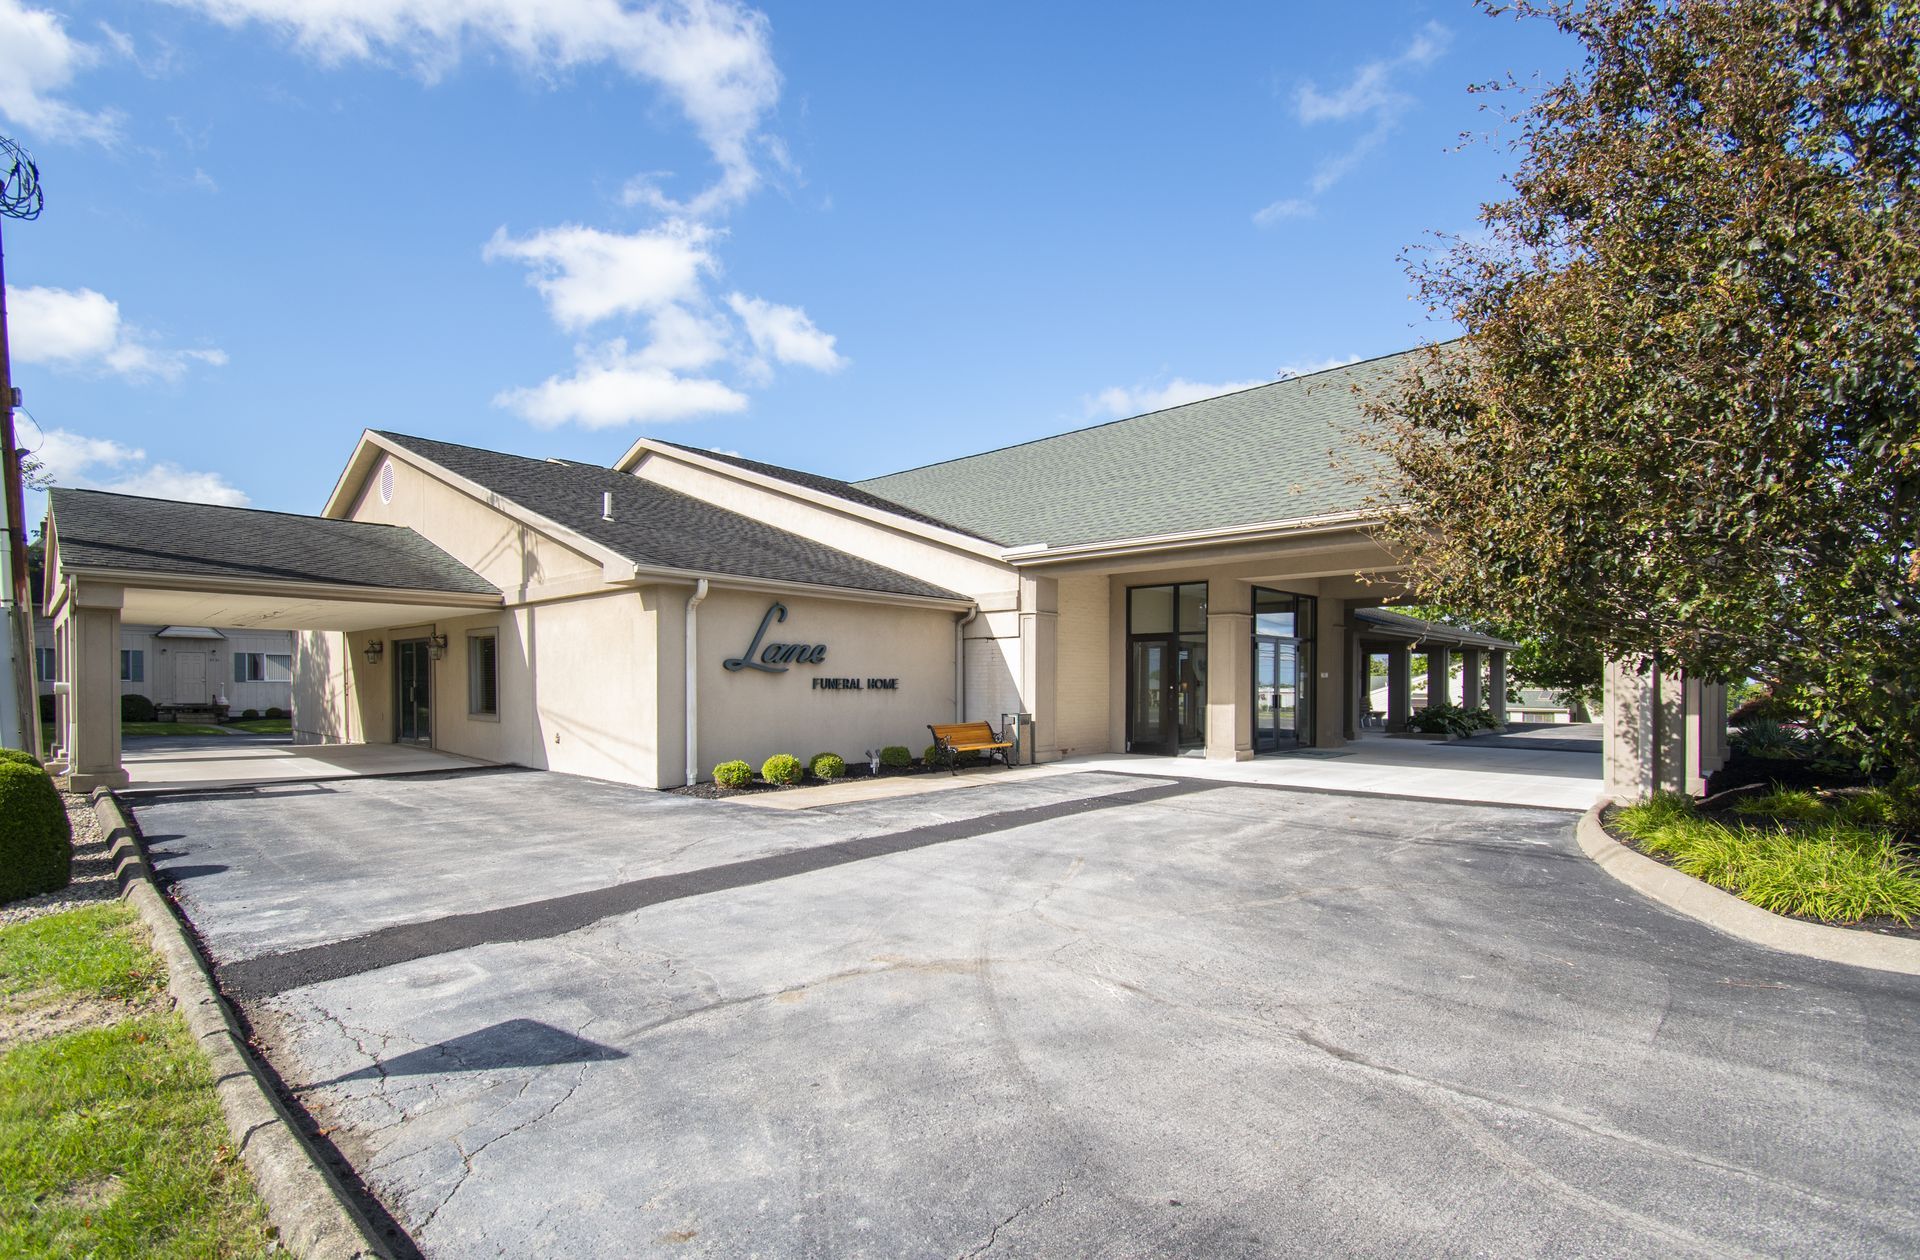 Austintown Funeral Home Outside View